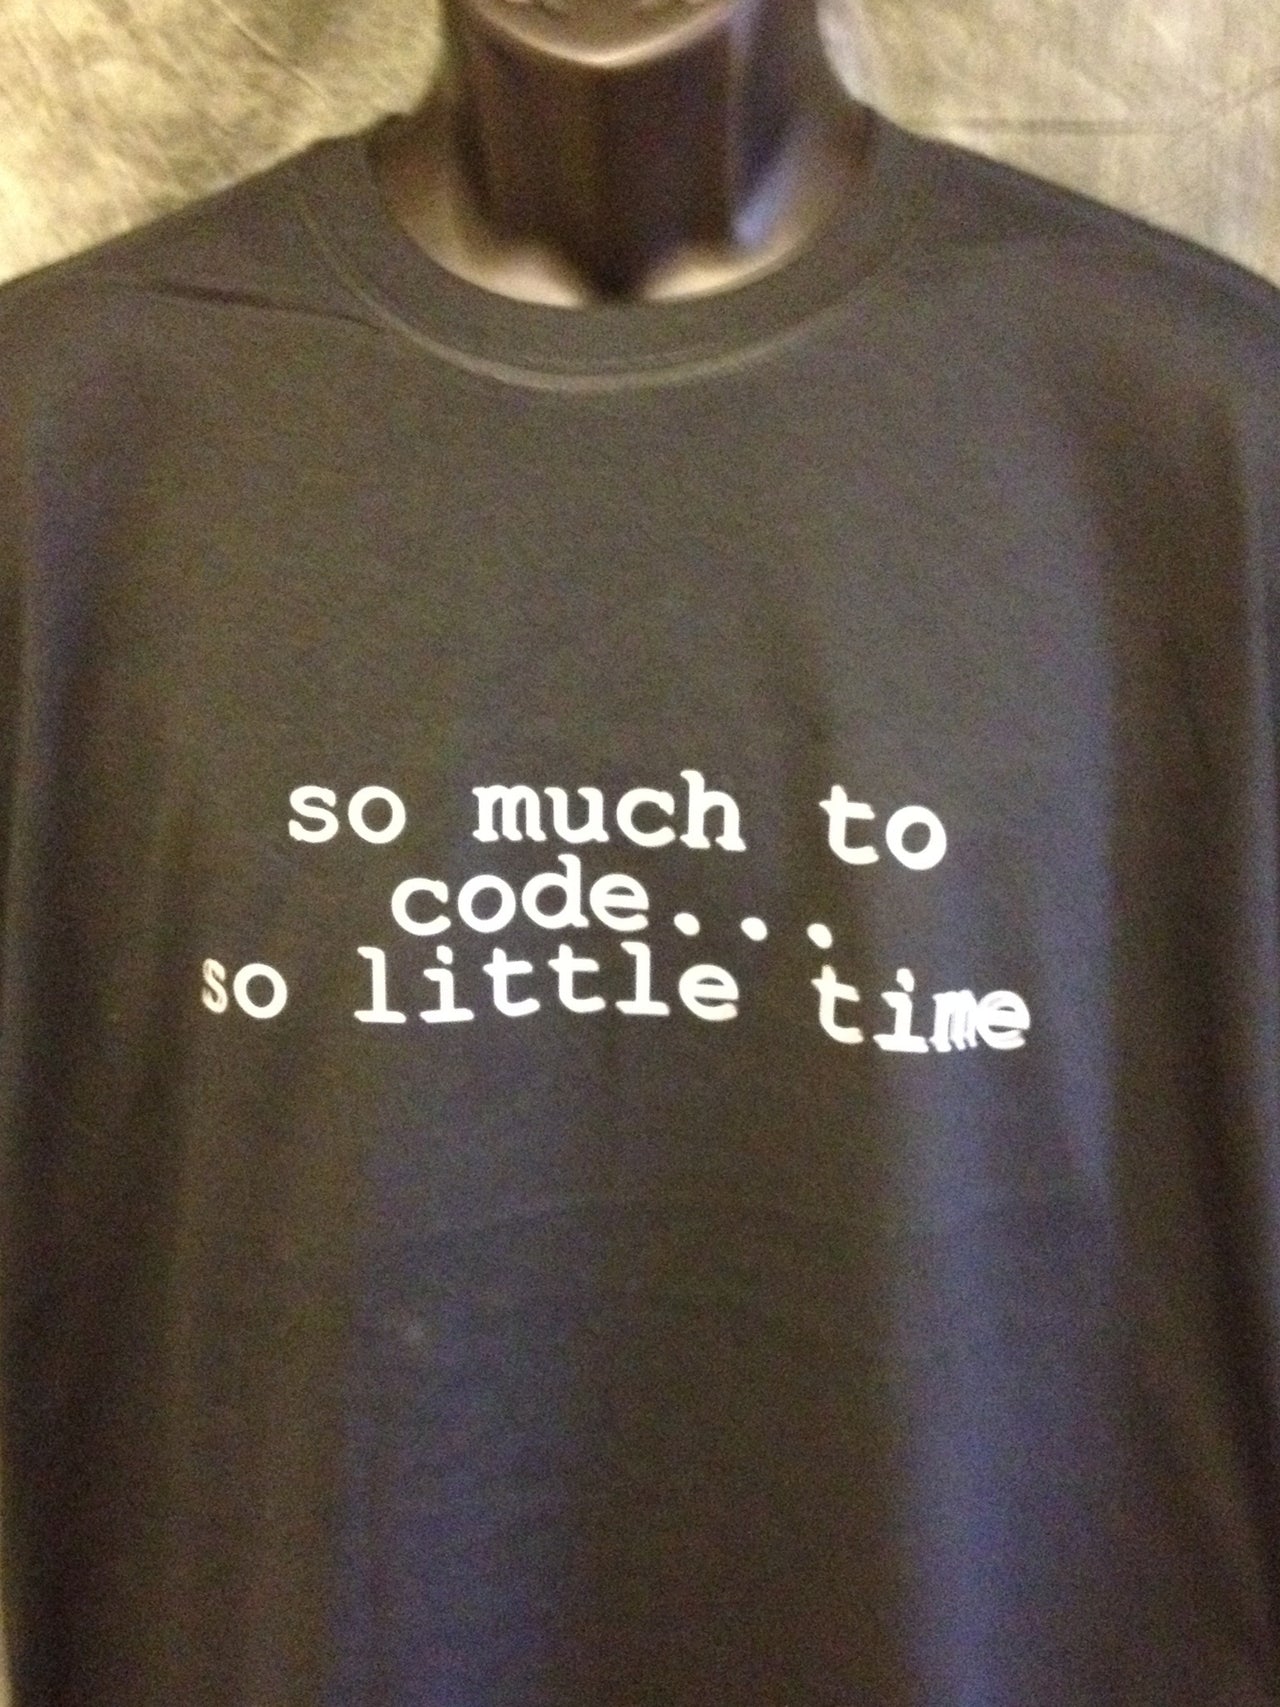 So Much To Code...So Little Time Tshirt: Black With White Print - TshirtNow.net - 2